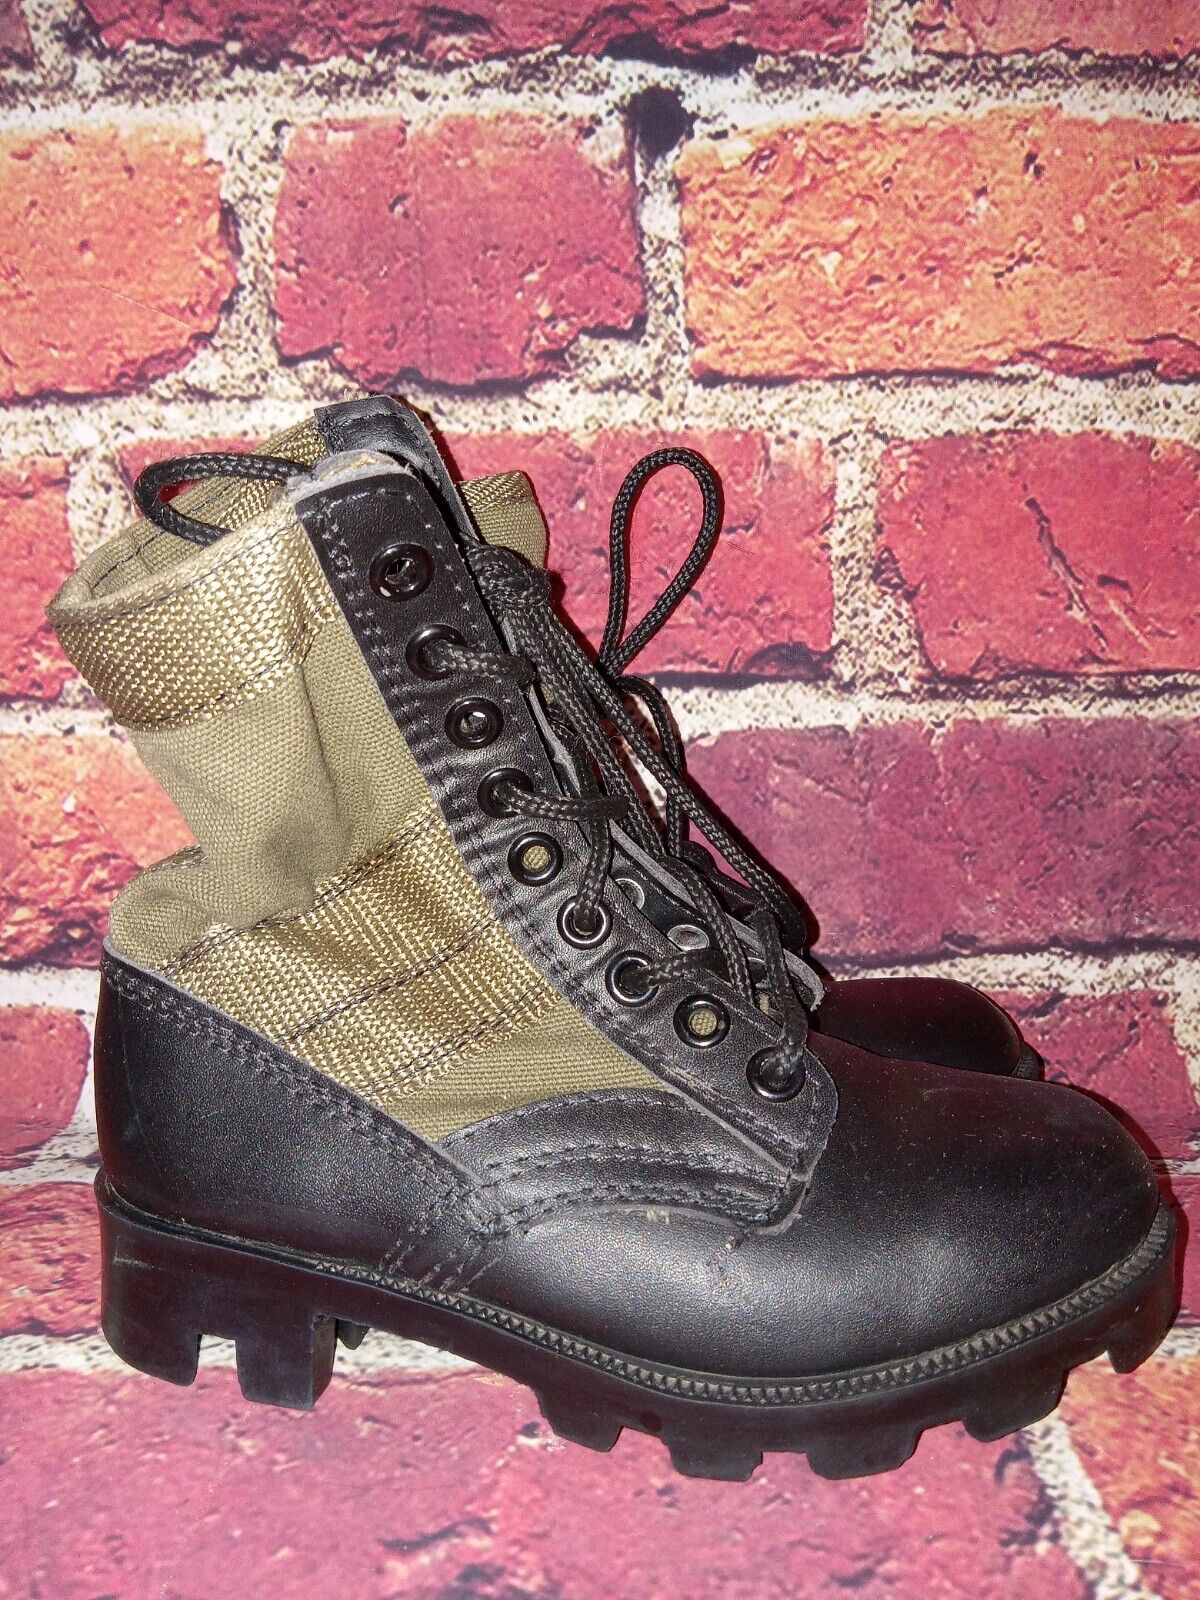 Rothco Boys Military Boots Size 1 R NEW